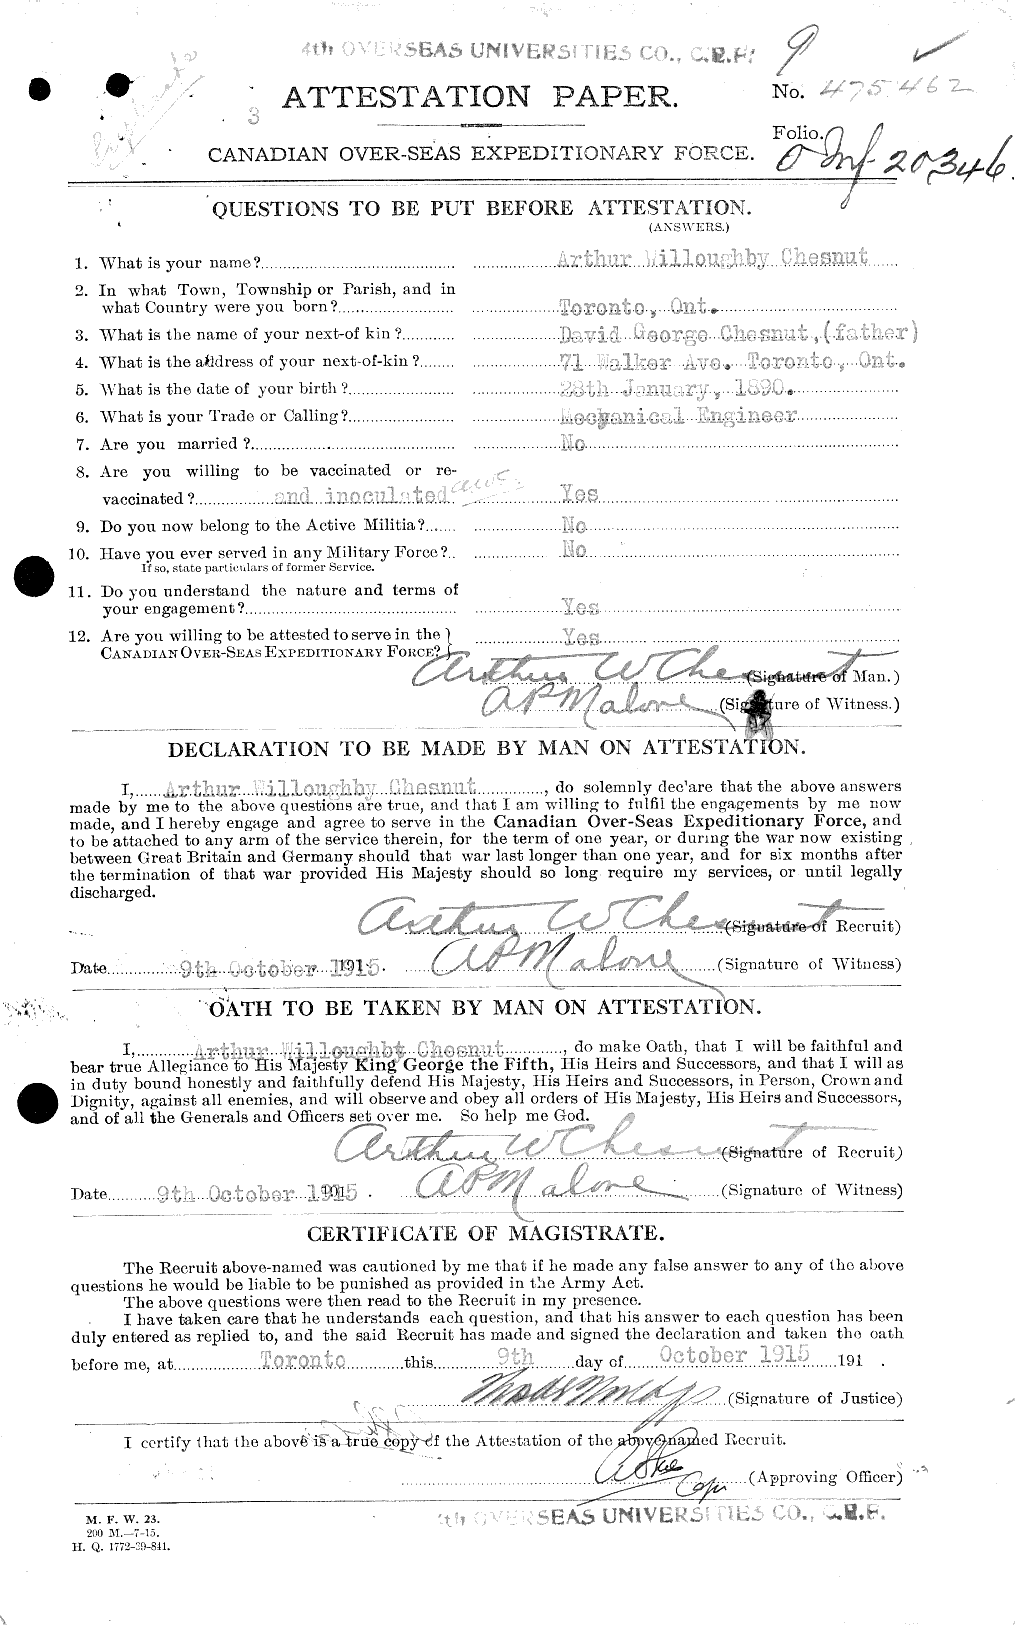 Personnel Records of the First World War - CEF 017662a